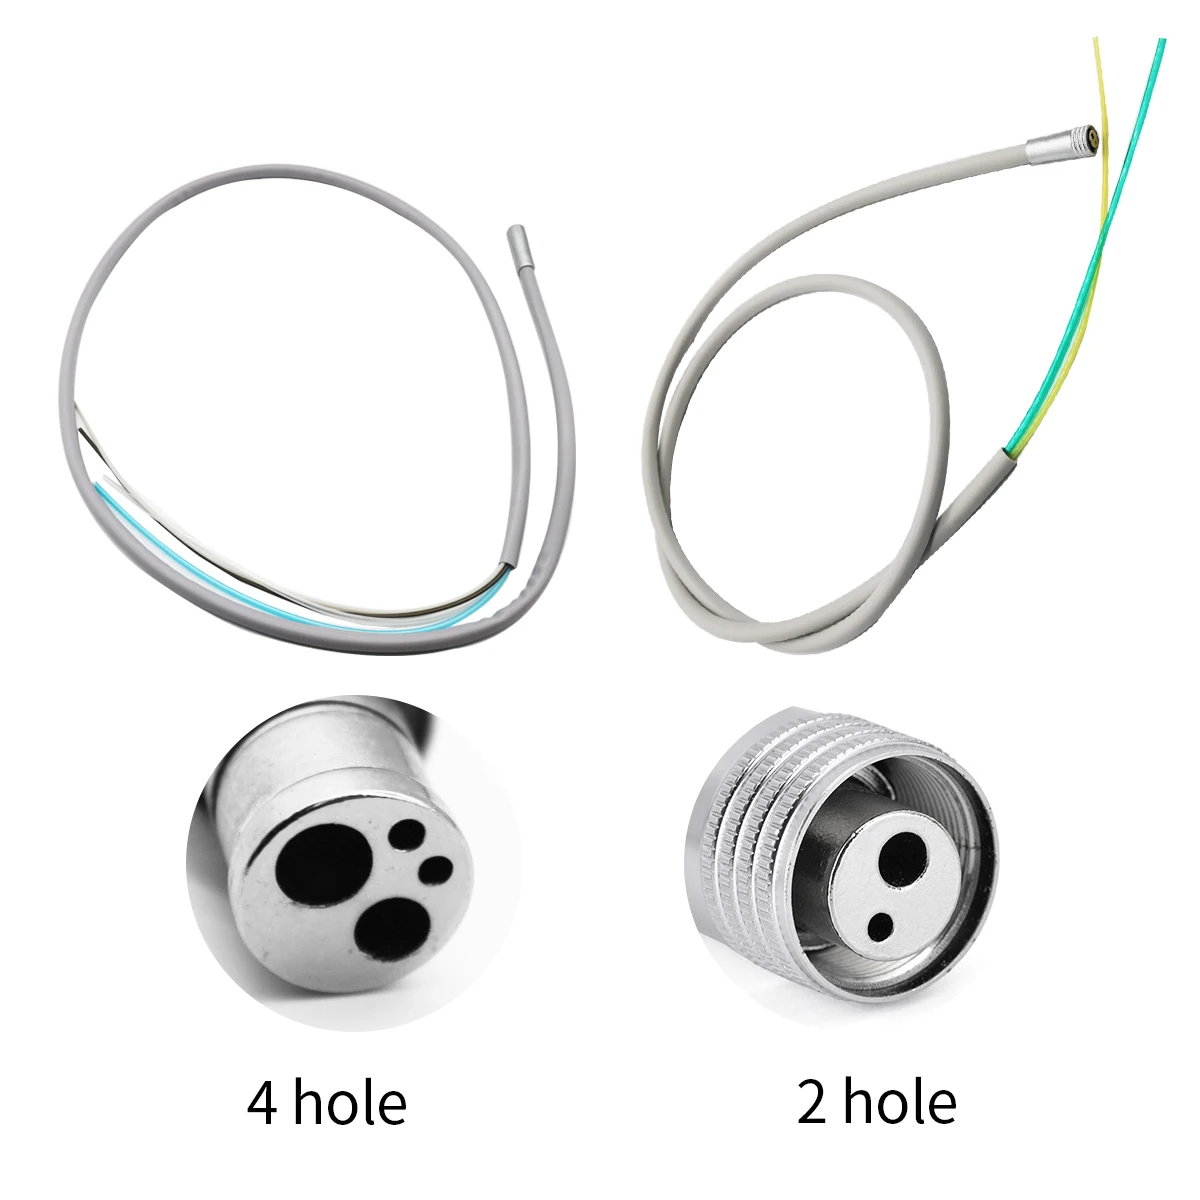 

2/4 Holes Dental Handpiece Hose Tube with Connector for High Speed Handpiece Dentistry Material